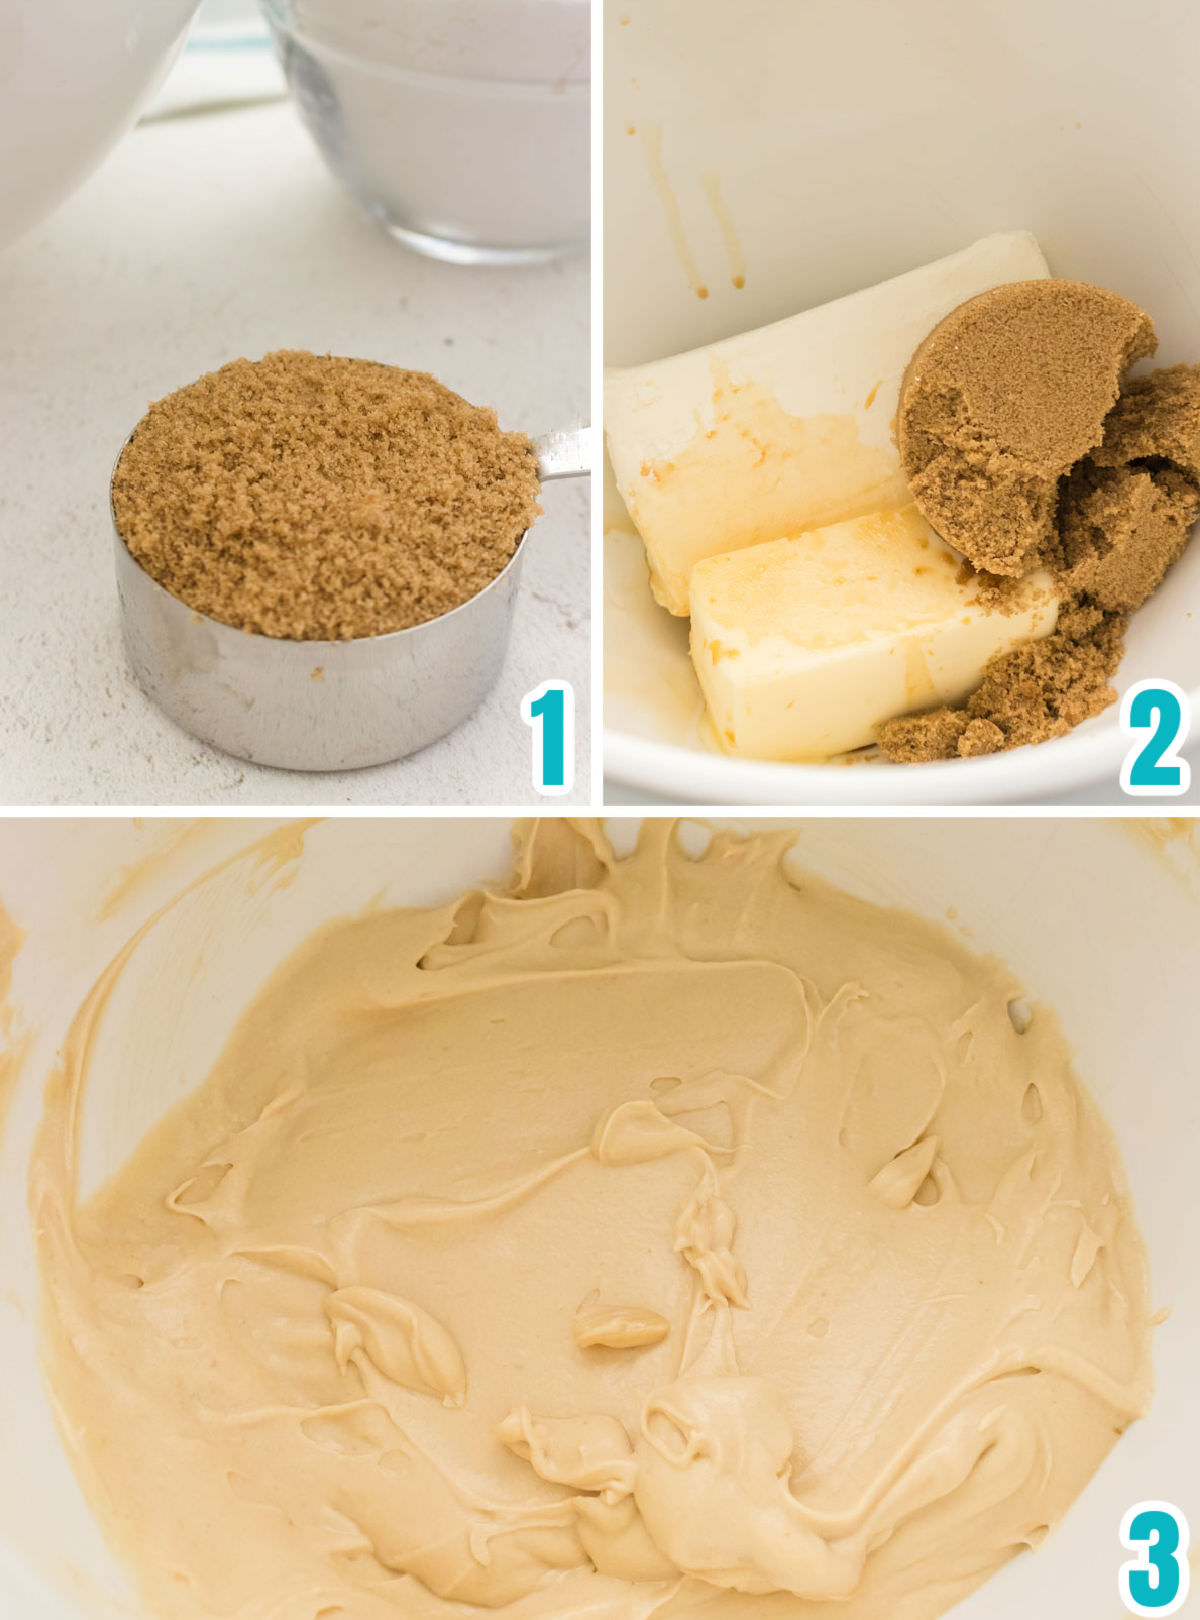 Collage image showing the steps for mixing the butter, cream cheese, vanilla and brown sugar to make the best flavored frosting.